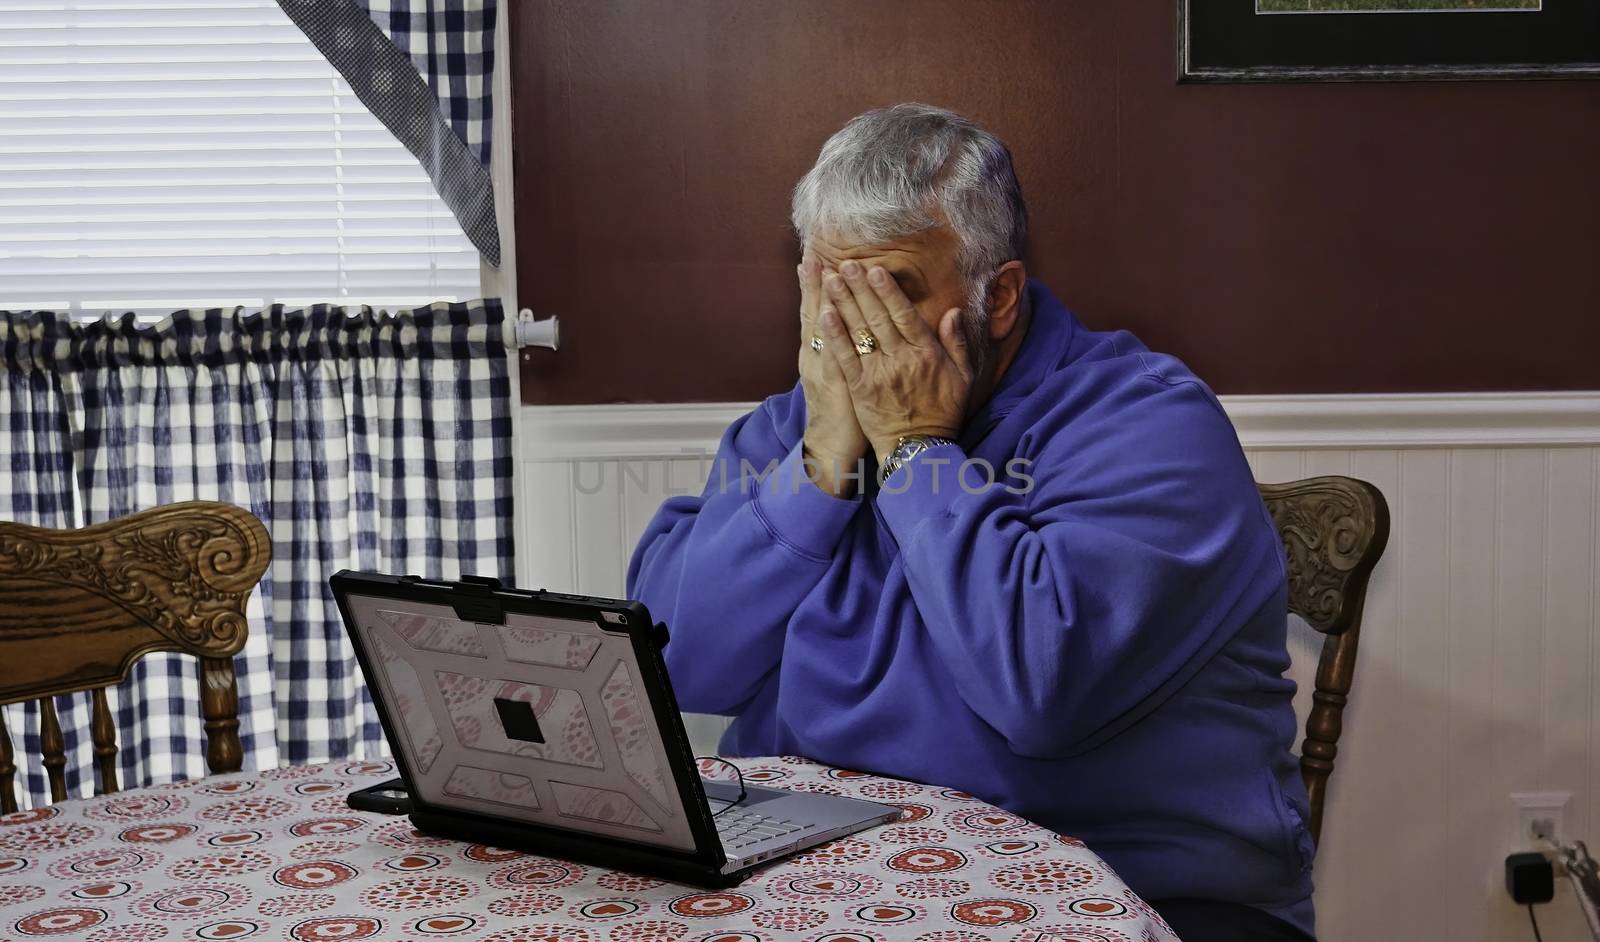 Senior Upset and Mad at Using a Computer and Technology by actionphoto50